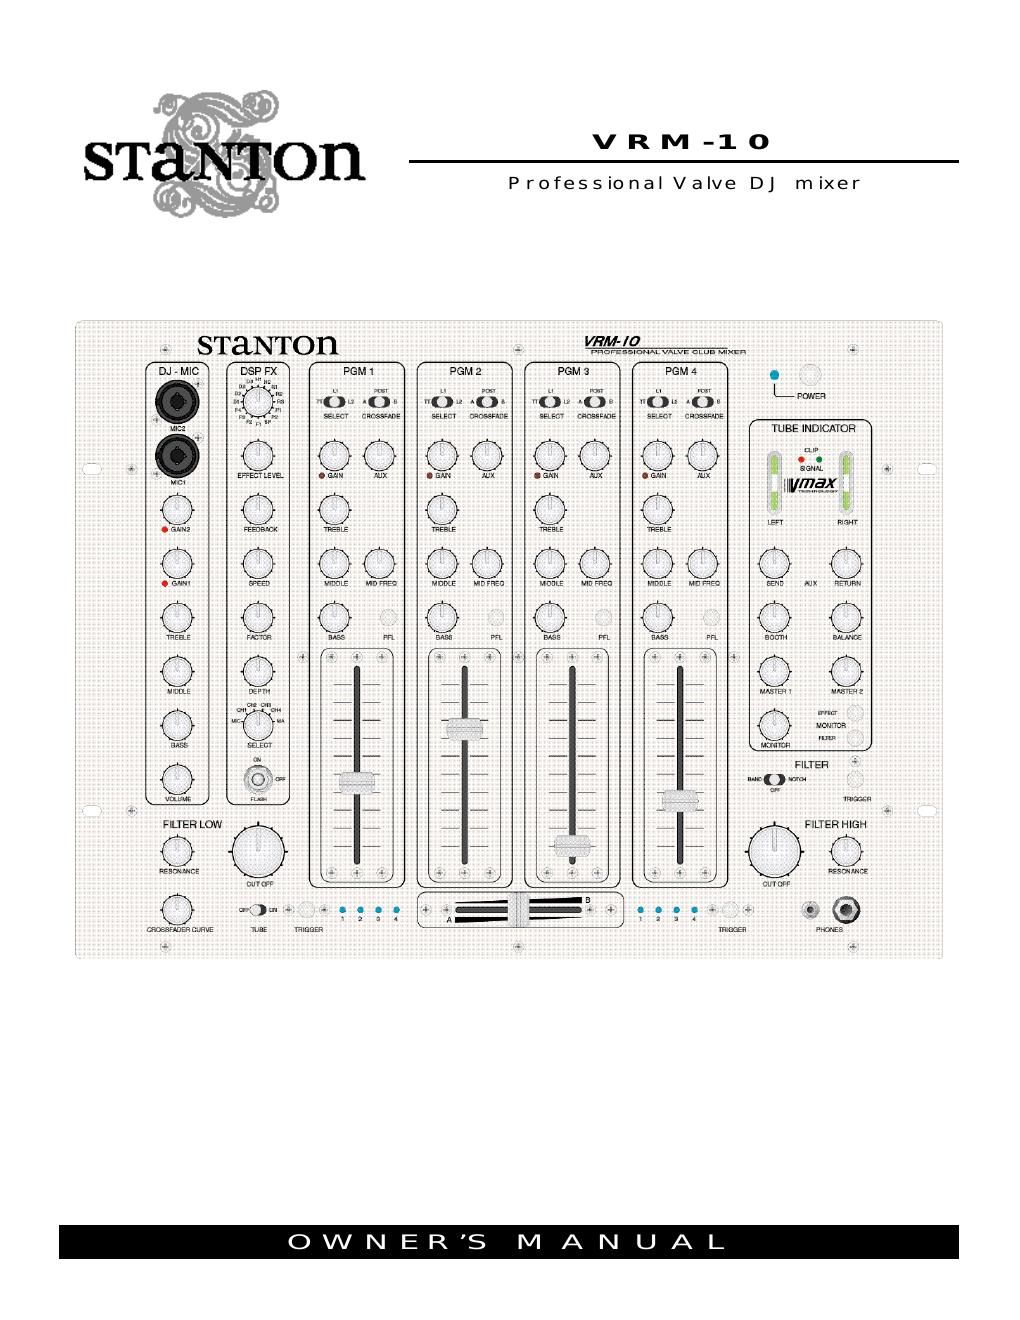 stanton vrm 10 owners manual